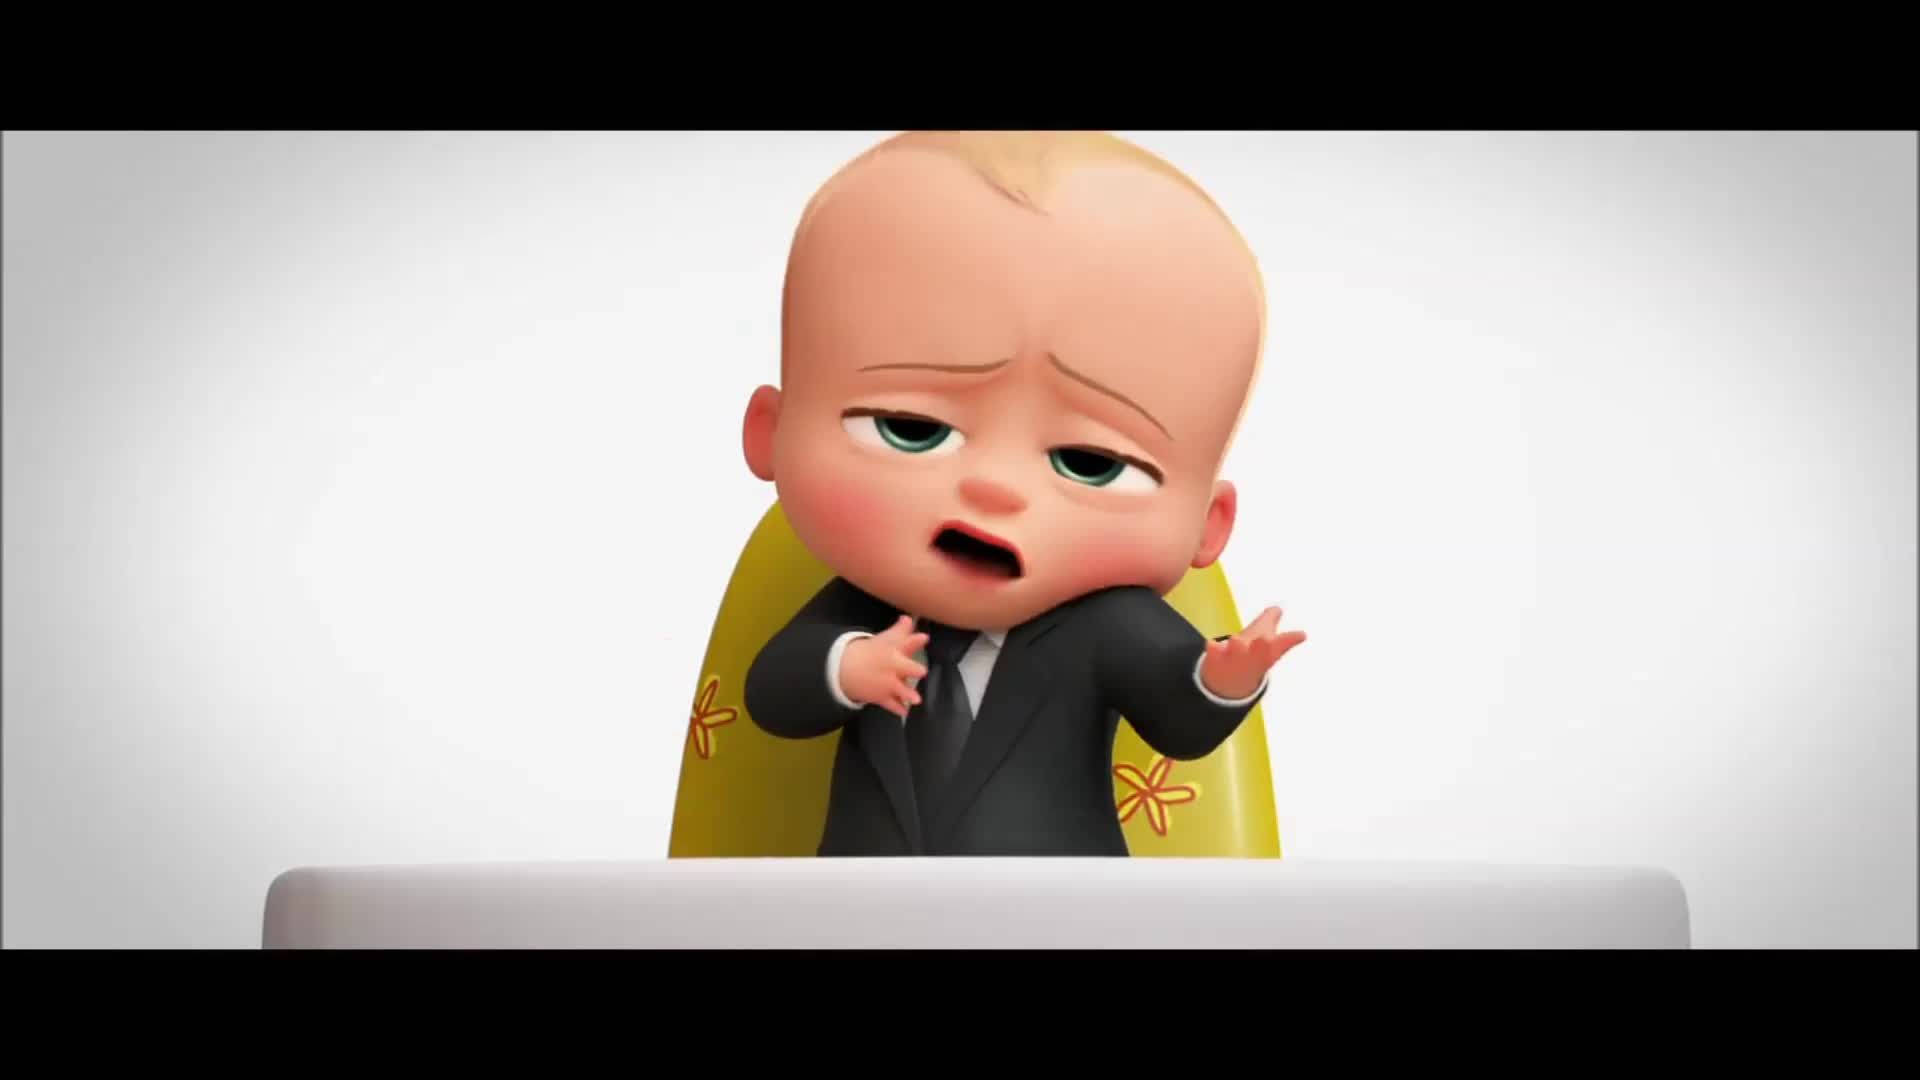 The Boss Baby Comedy Movie Background